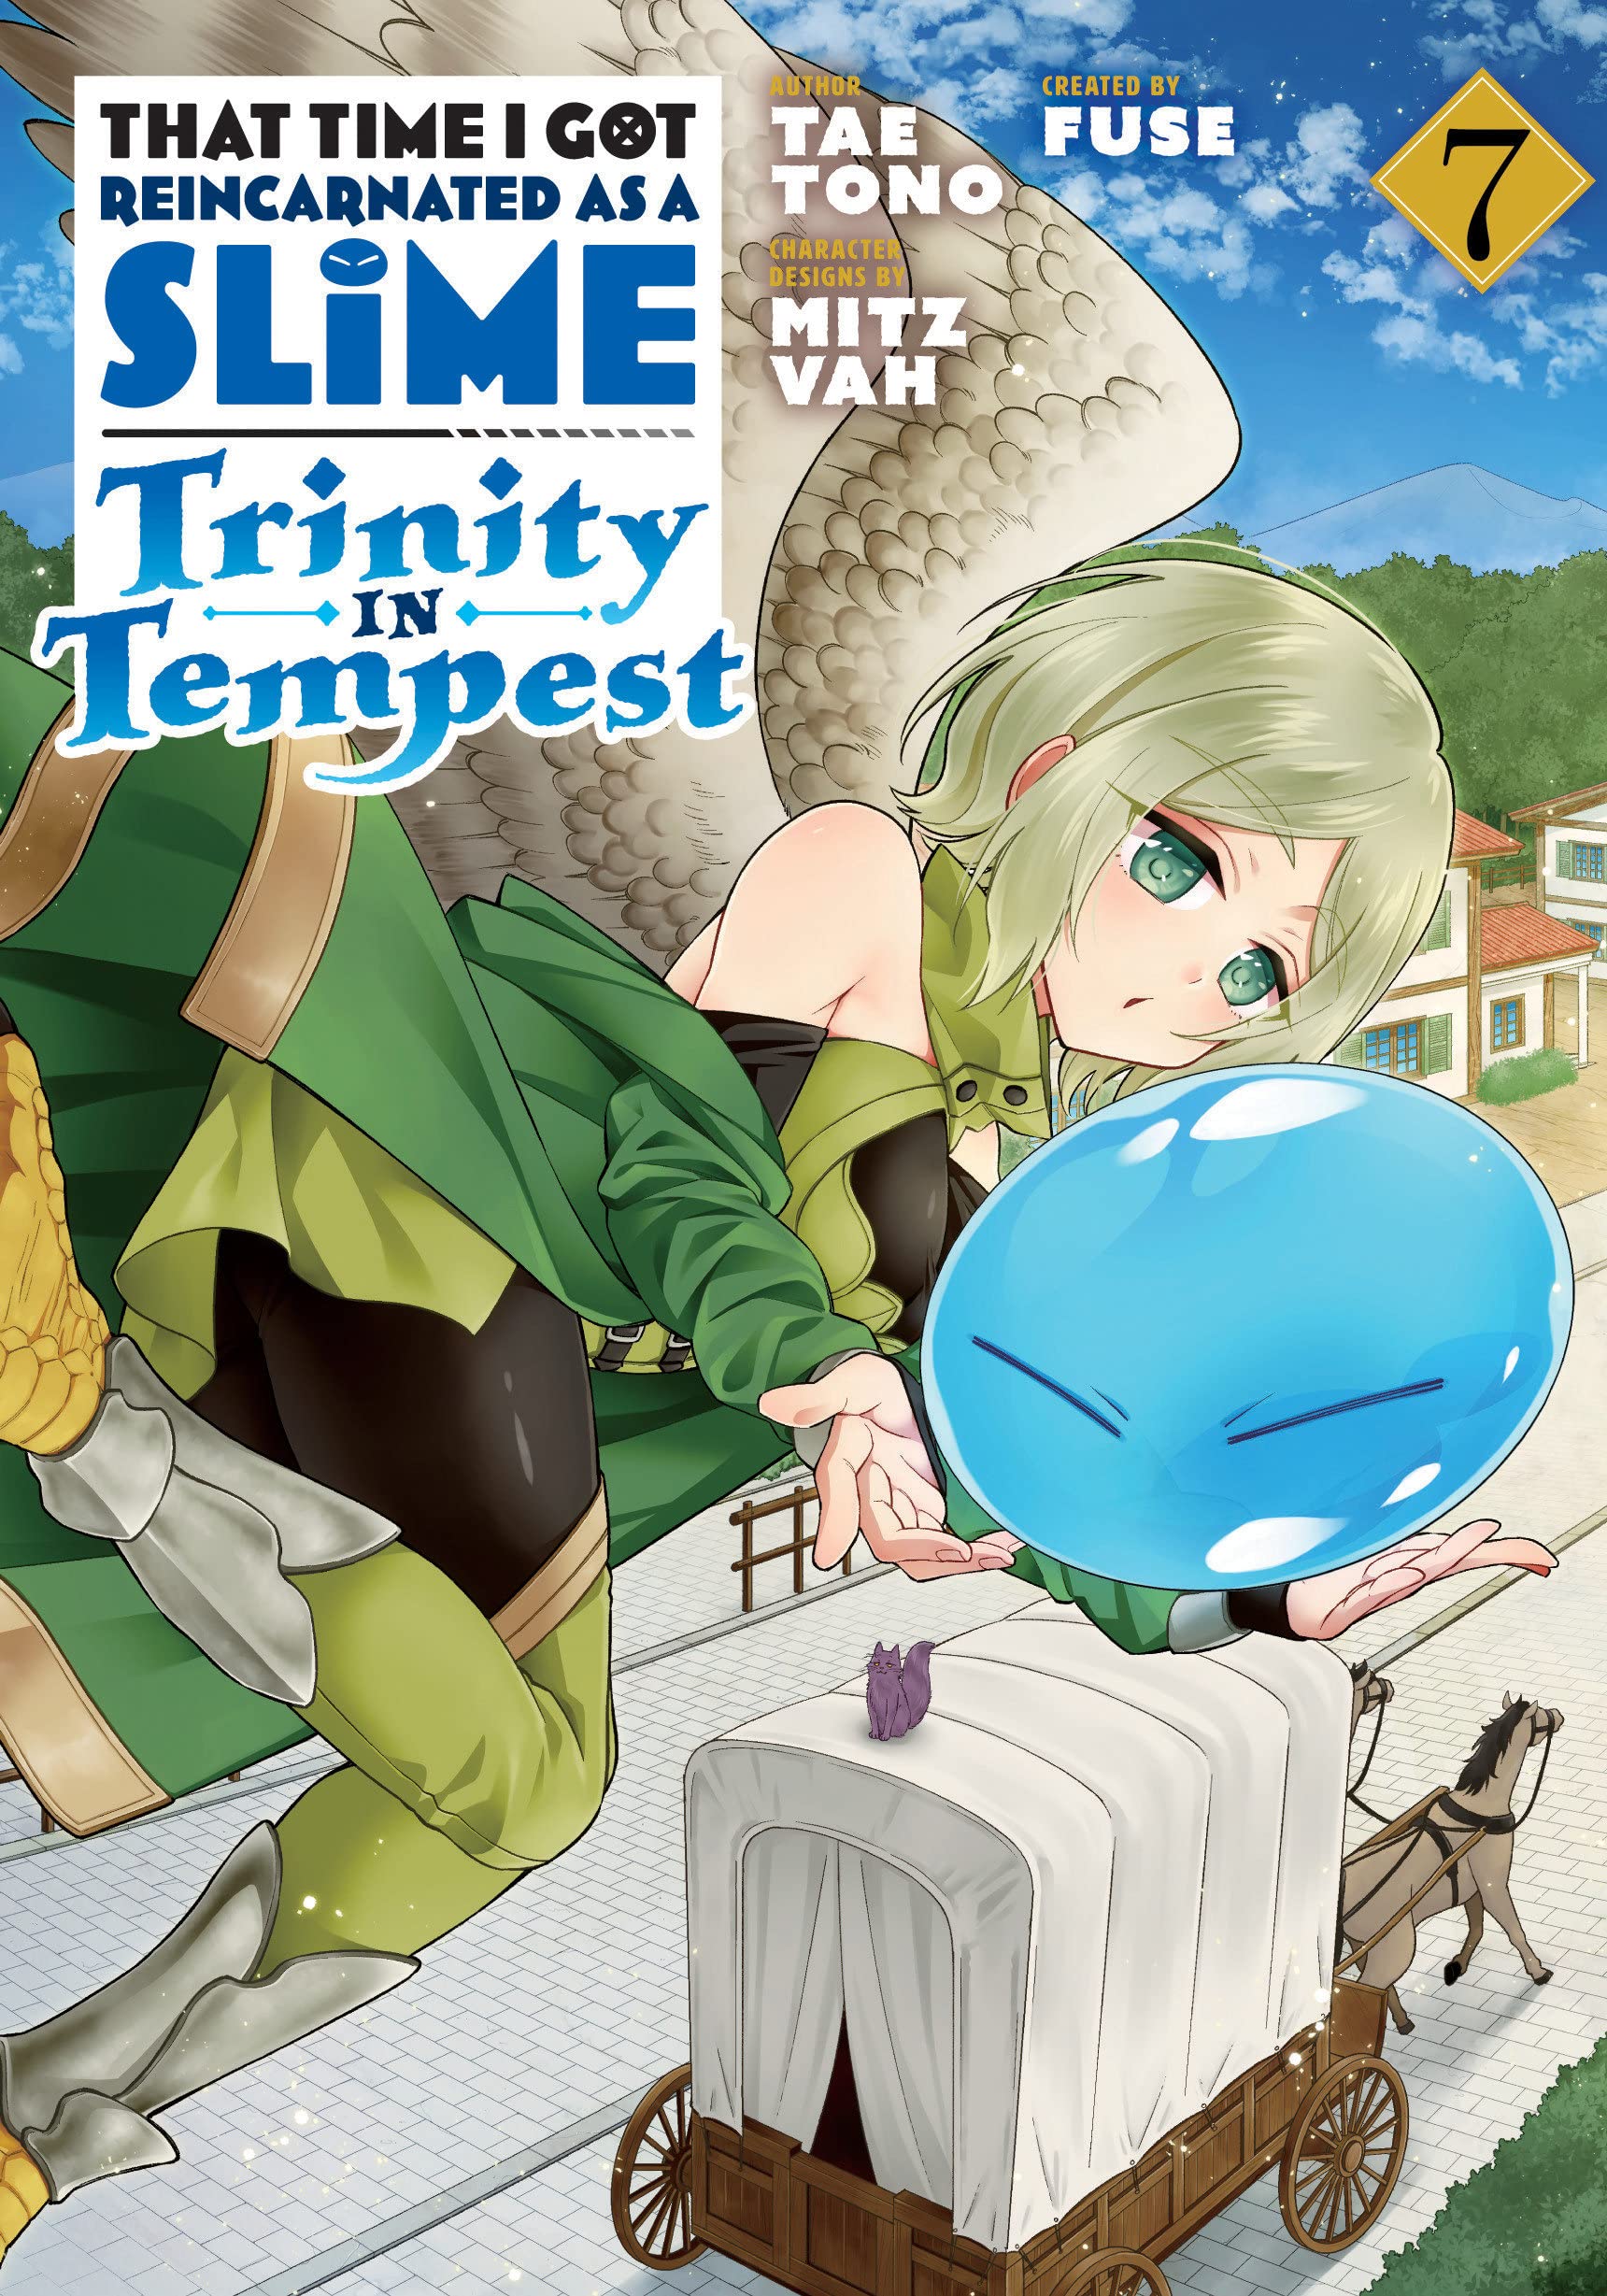 That Time I Got Reincarnated as a Slime: Trinity in Tempest (Manga) Vol. 07